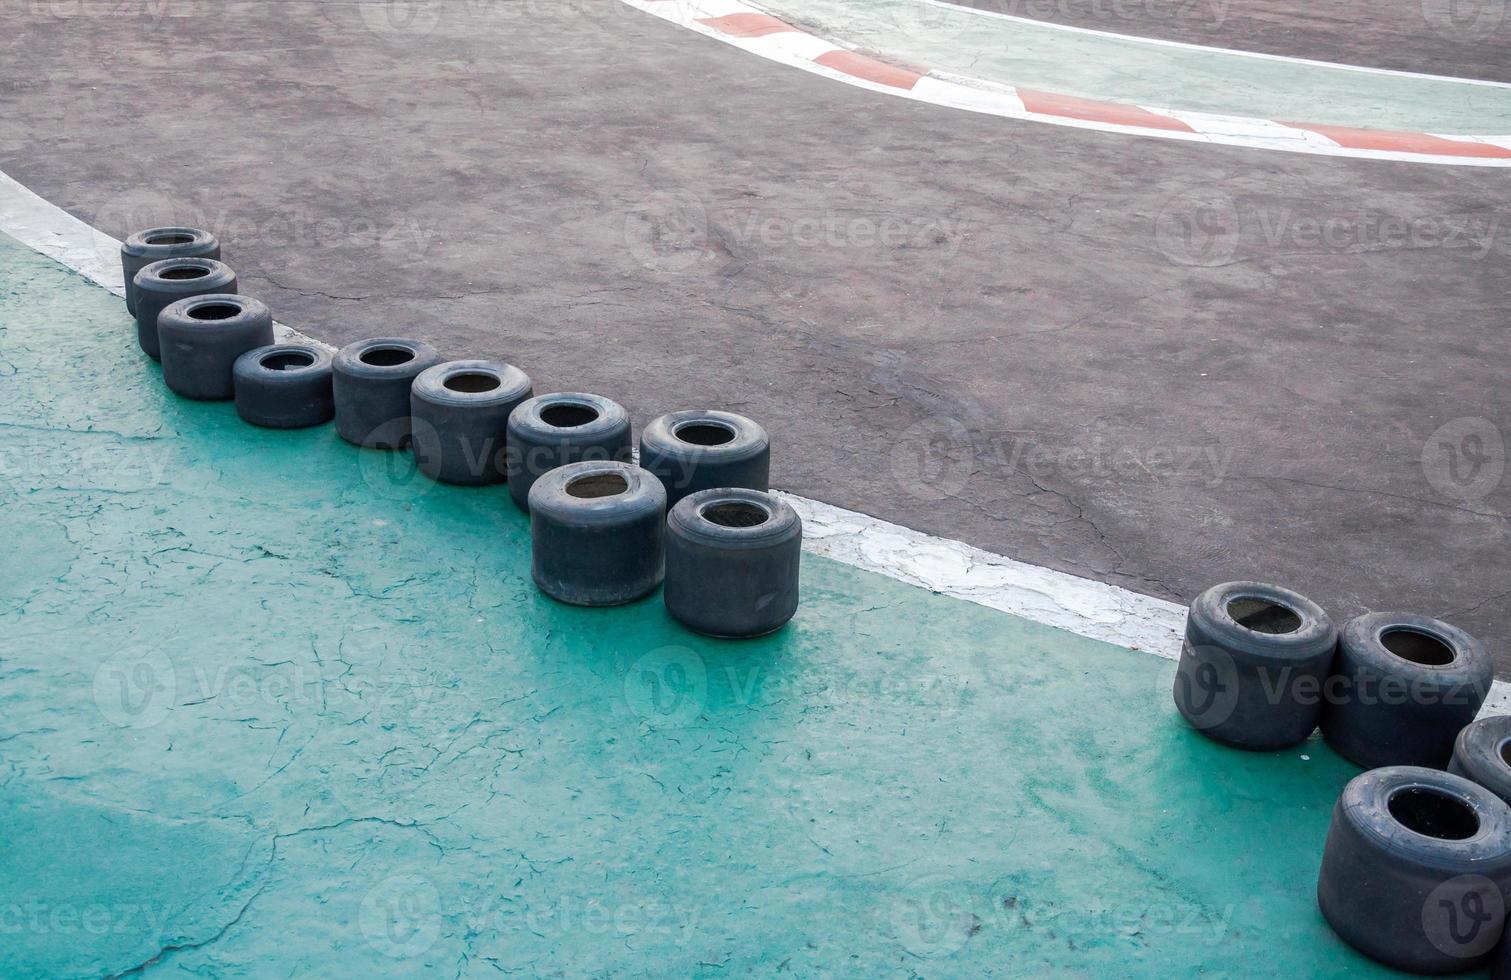 Go-kart and small tires racetrack circuit. Small karting racetrack,motorsport for youth photo